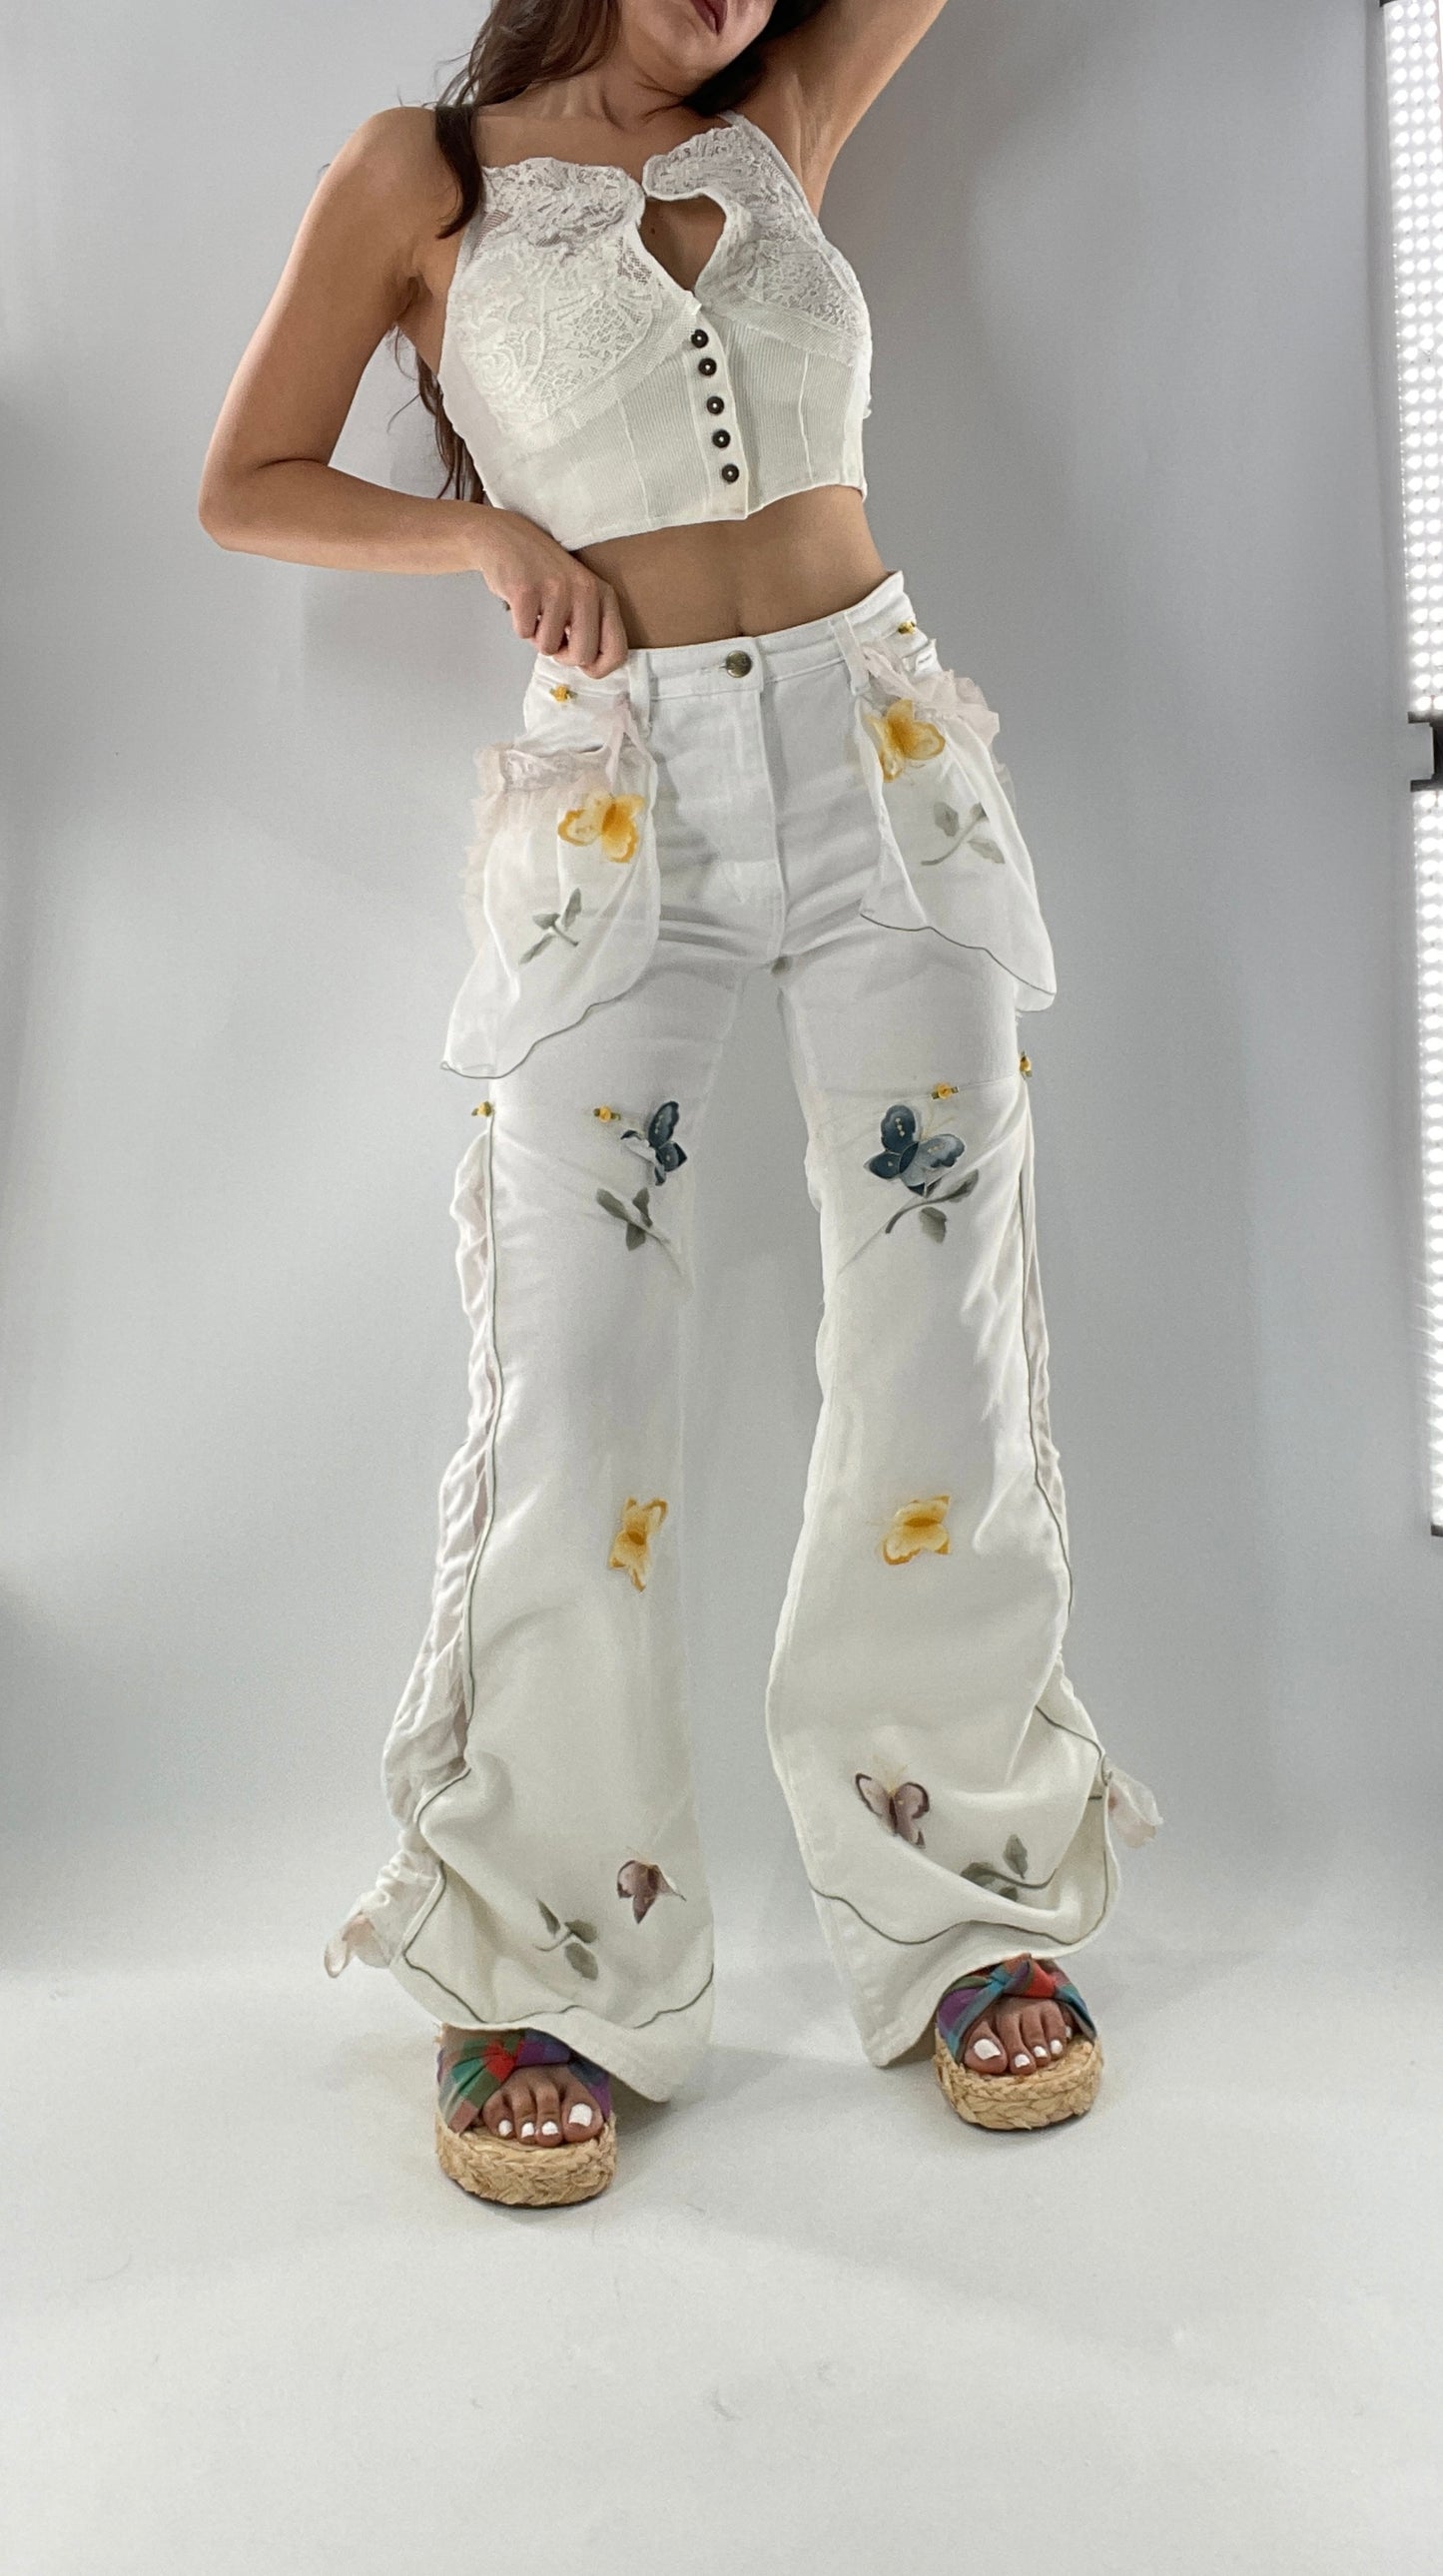 Remade Upcycled Lee White Jeans with Drawstring Adjustable Length, Lace Trim Pockets, Embroidery and Appliqué Details (27)